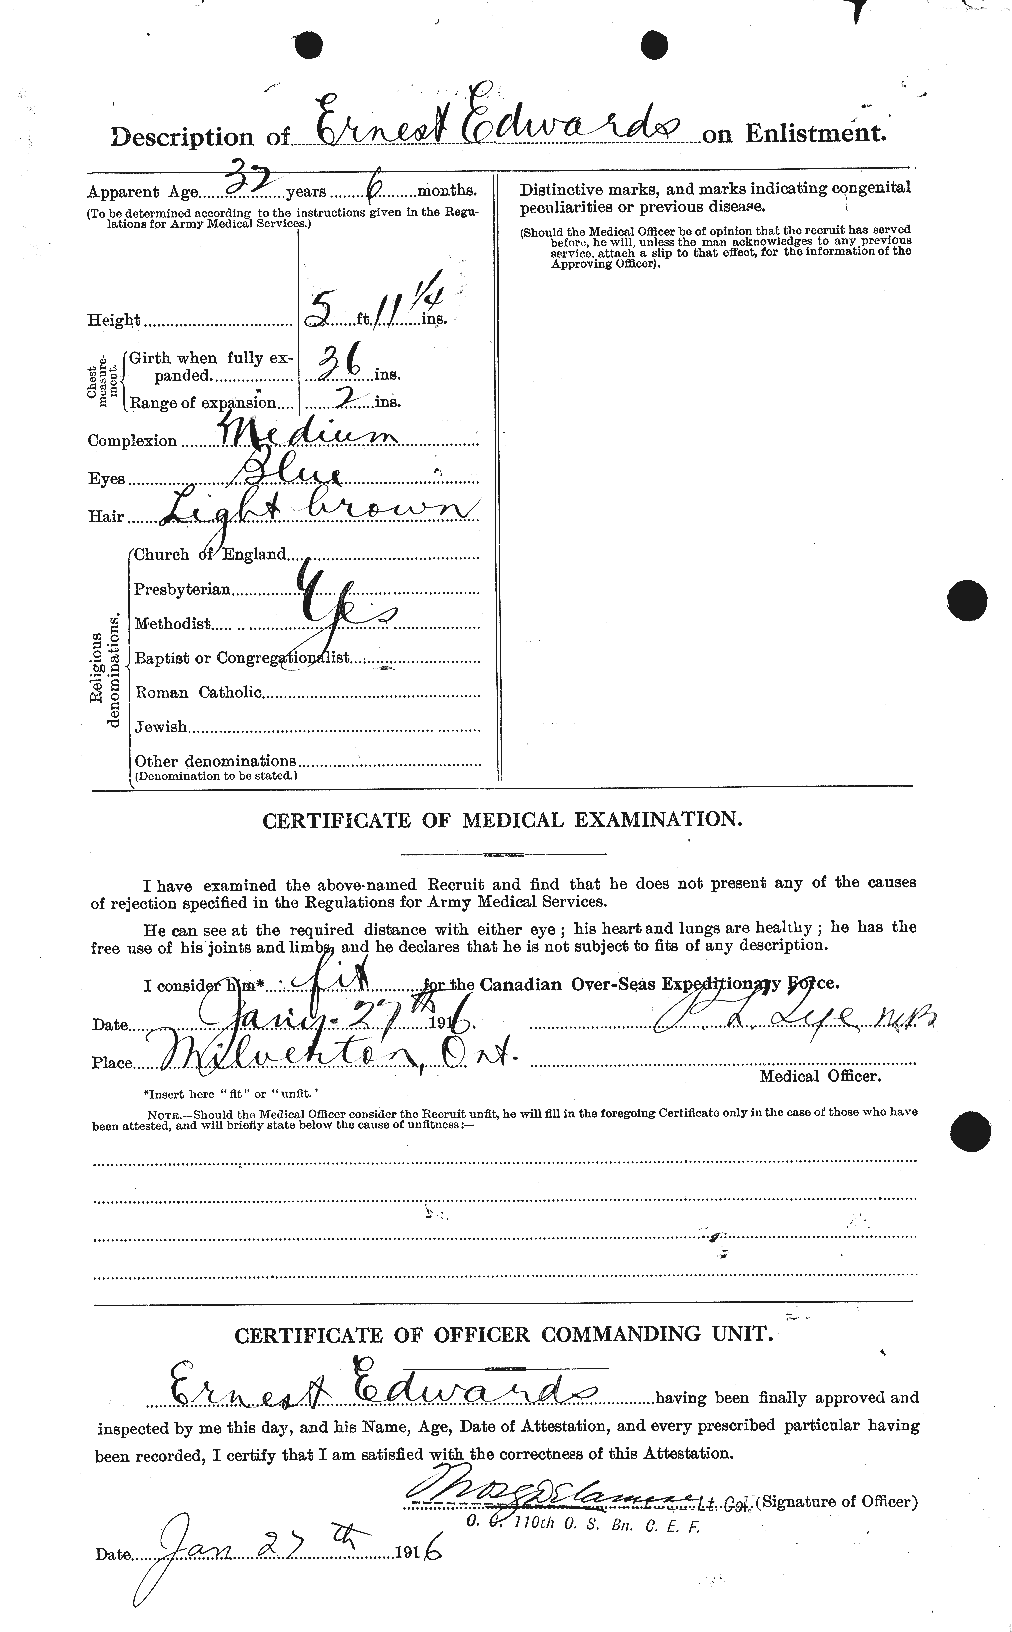 Personnel Records of the First World War - CEF 309000b